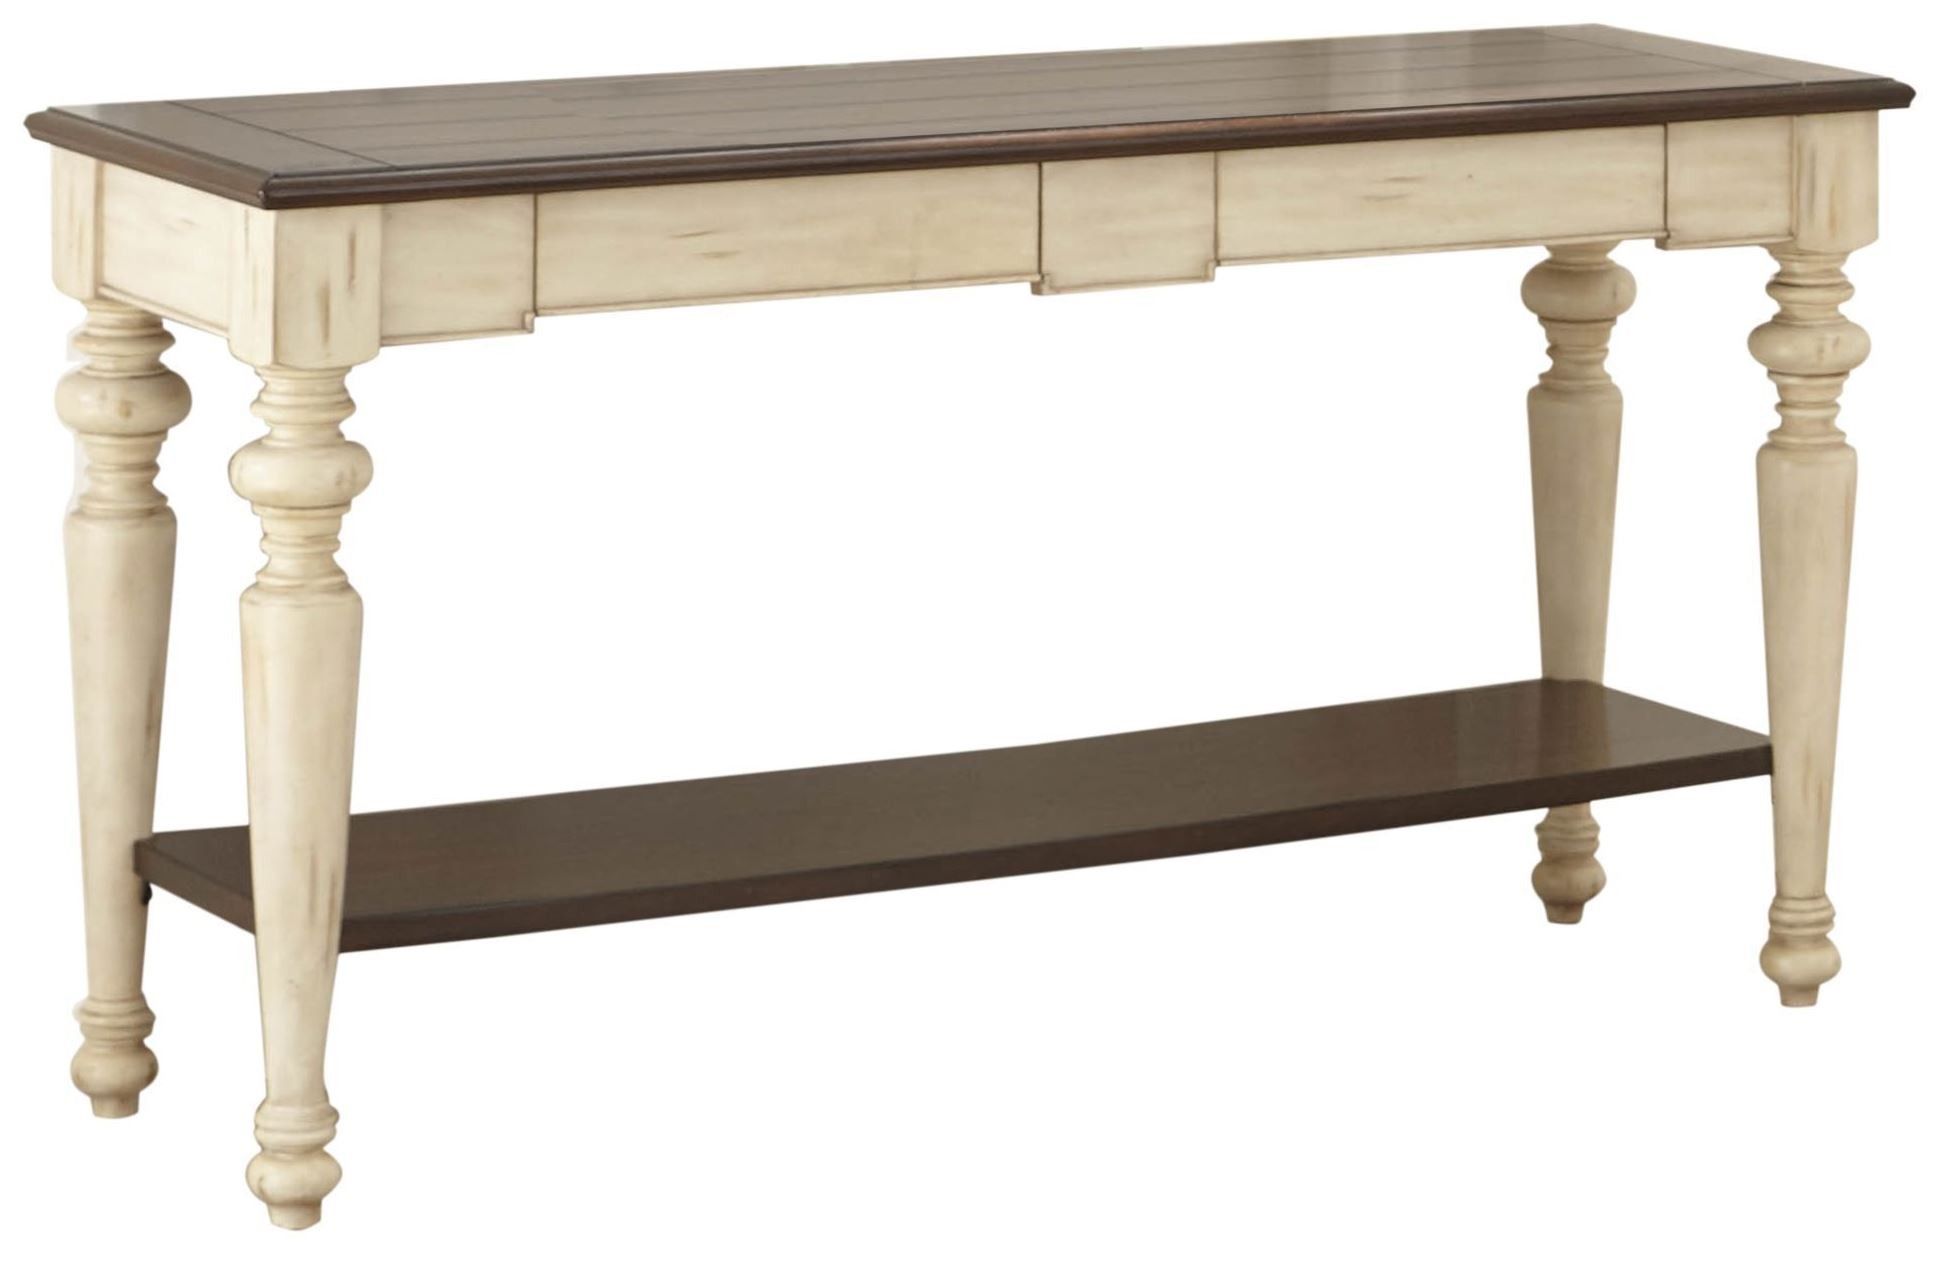 Wesley Antique White And Walnut Sofa Table, Wy300s, Steve Silver Inside Hand Finished Walnut Console Tables (View 20 of 20)